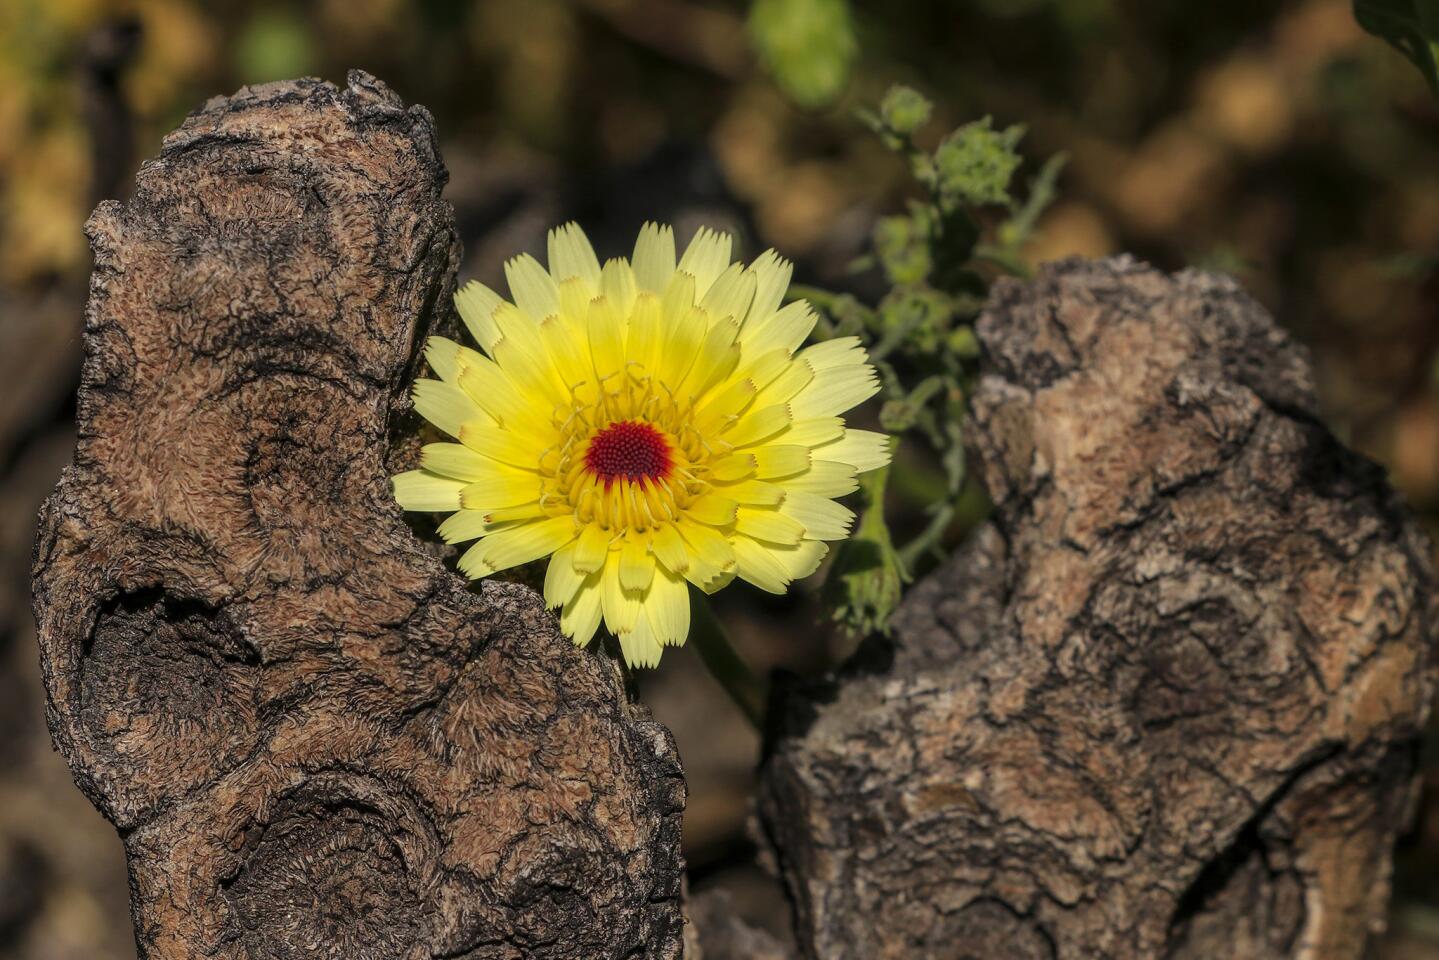 JOSHUA TREE NATIONAL PARK ,CA., APRIL 6, 2019: After a long wet winter the wildflowers are blooming all over Joshua Tree National Park with a great show of color that is attracting visitors to this unique high desert destination April 6, 2019 (Mark Boster For the LA Times).